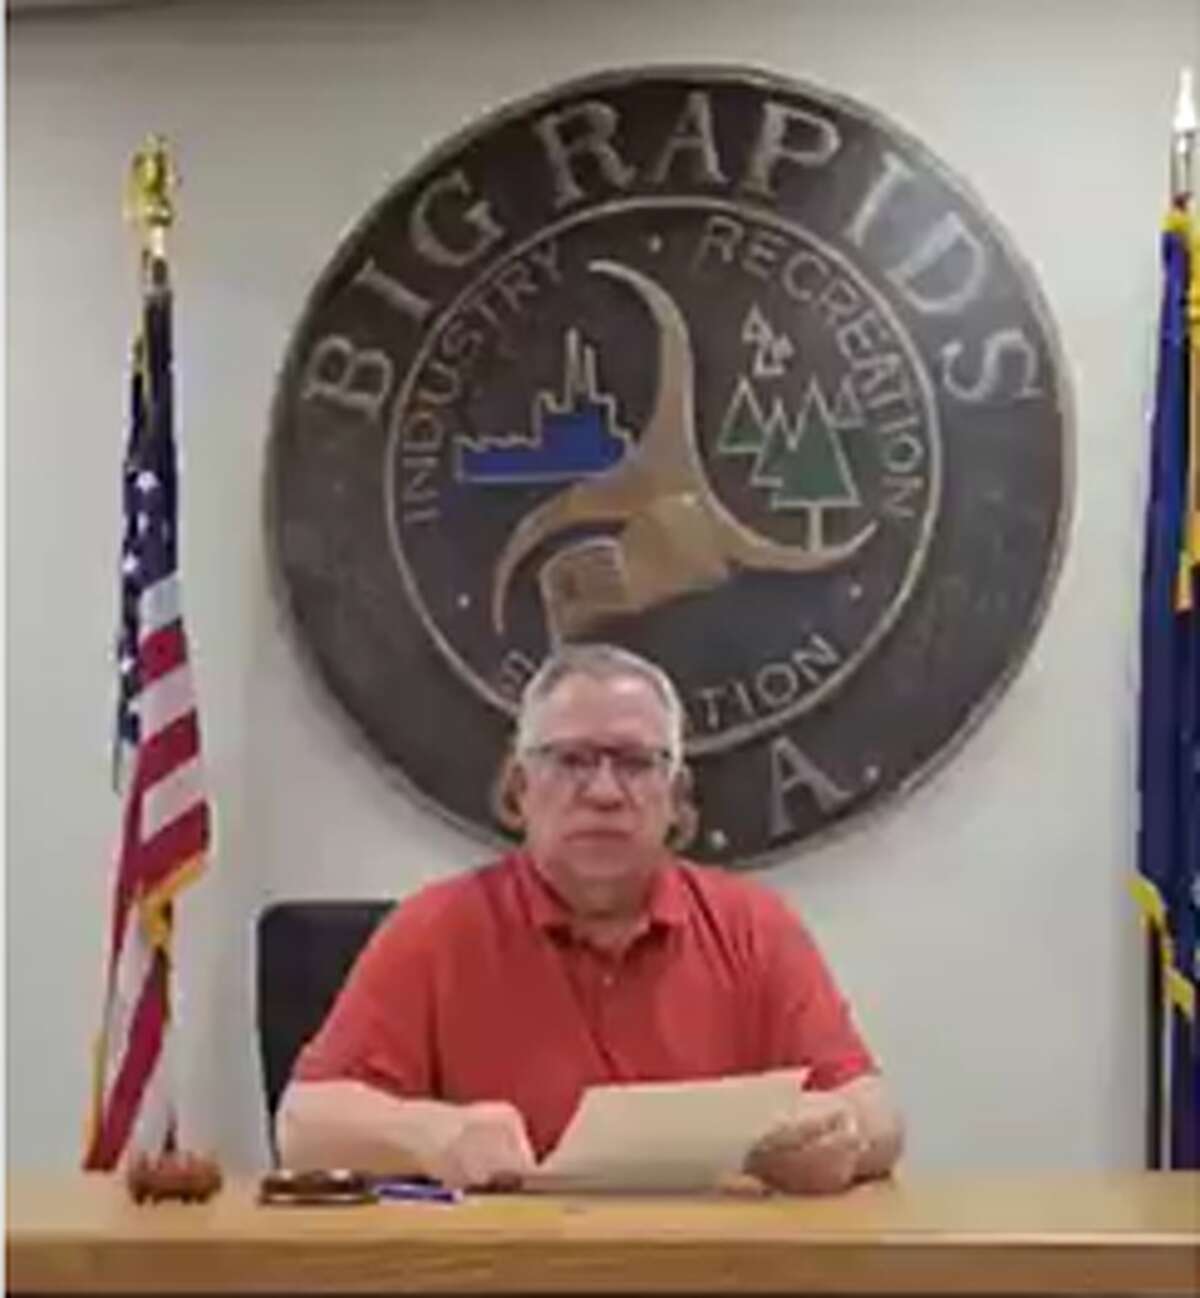 Following flooding and road damage due to heavy rains Wednesday, May 11, in downtown Big Rapids, Mayor Fred Guenther declared a state of emergency.